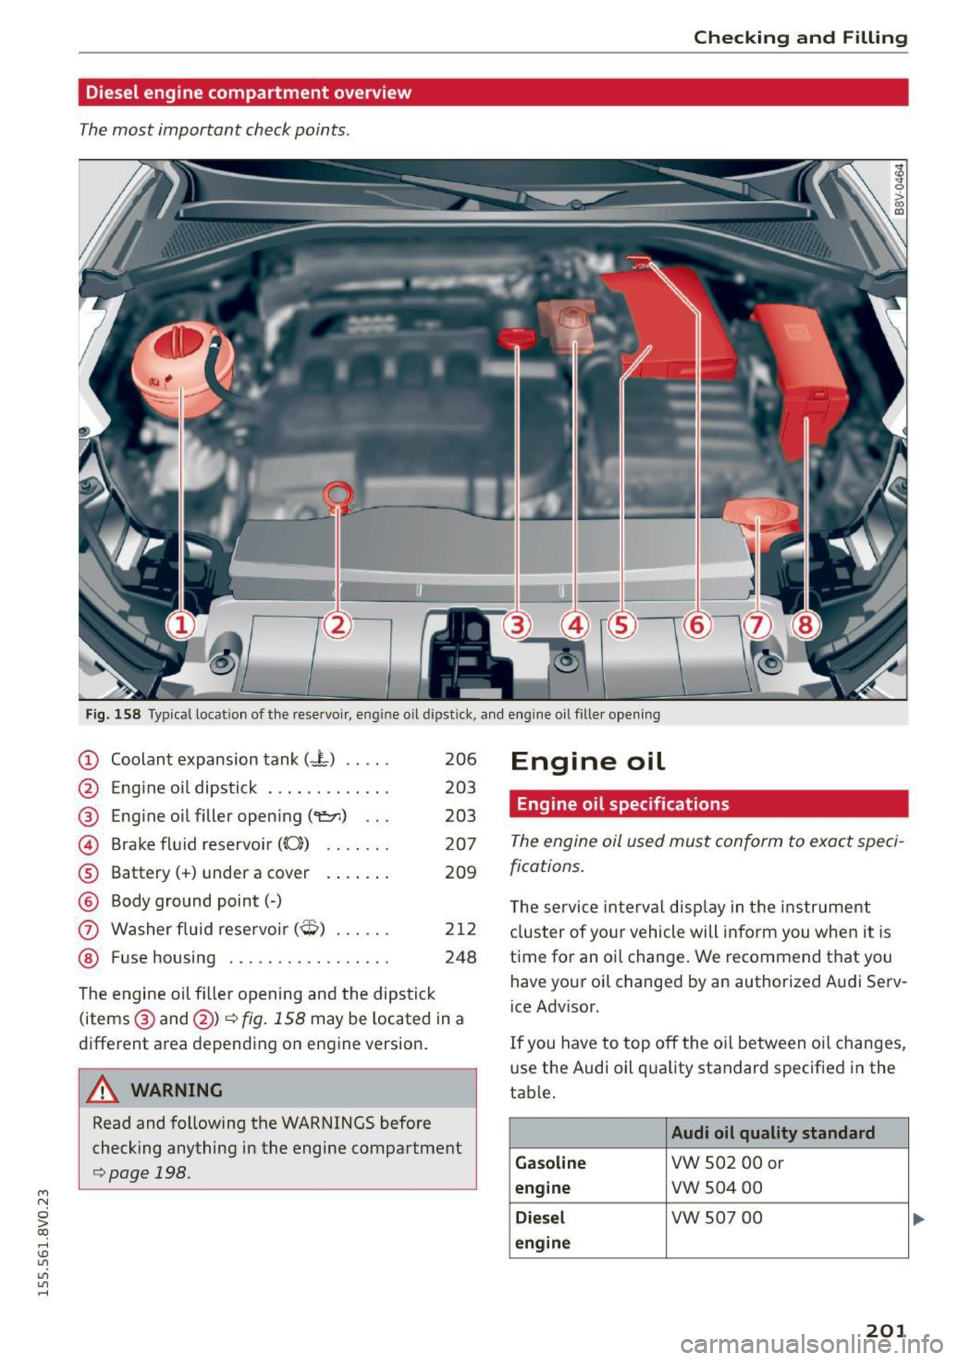 AUDI S3 SEDAN 2015  Owners Manual ...., 
N 
0 > co 
rl I.O 
" 
" 
" 
rl 
Checking and Filling 
Diesel  engine  compartment  overview 
The most  important  check points . 
Fig. 158 Typical locat ion  of  the  reservoi r, eng ine  oi